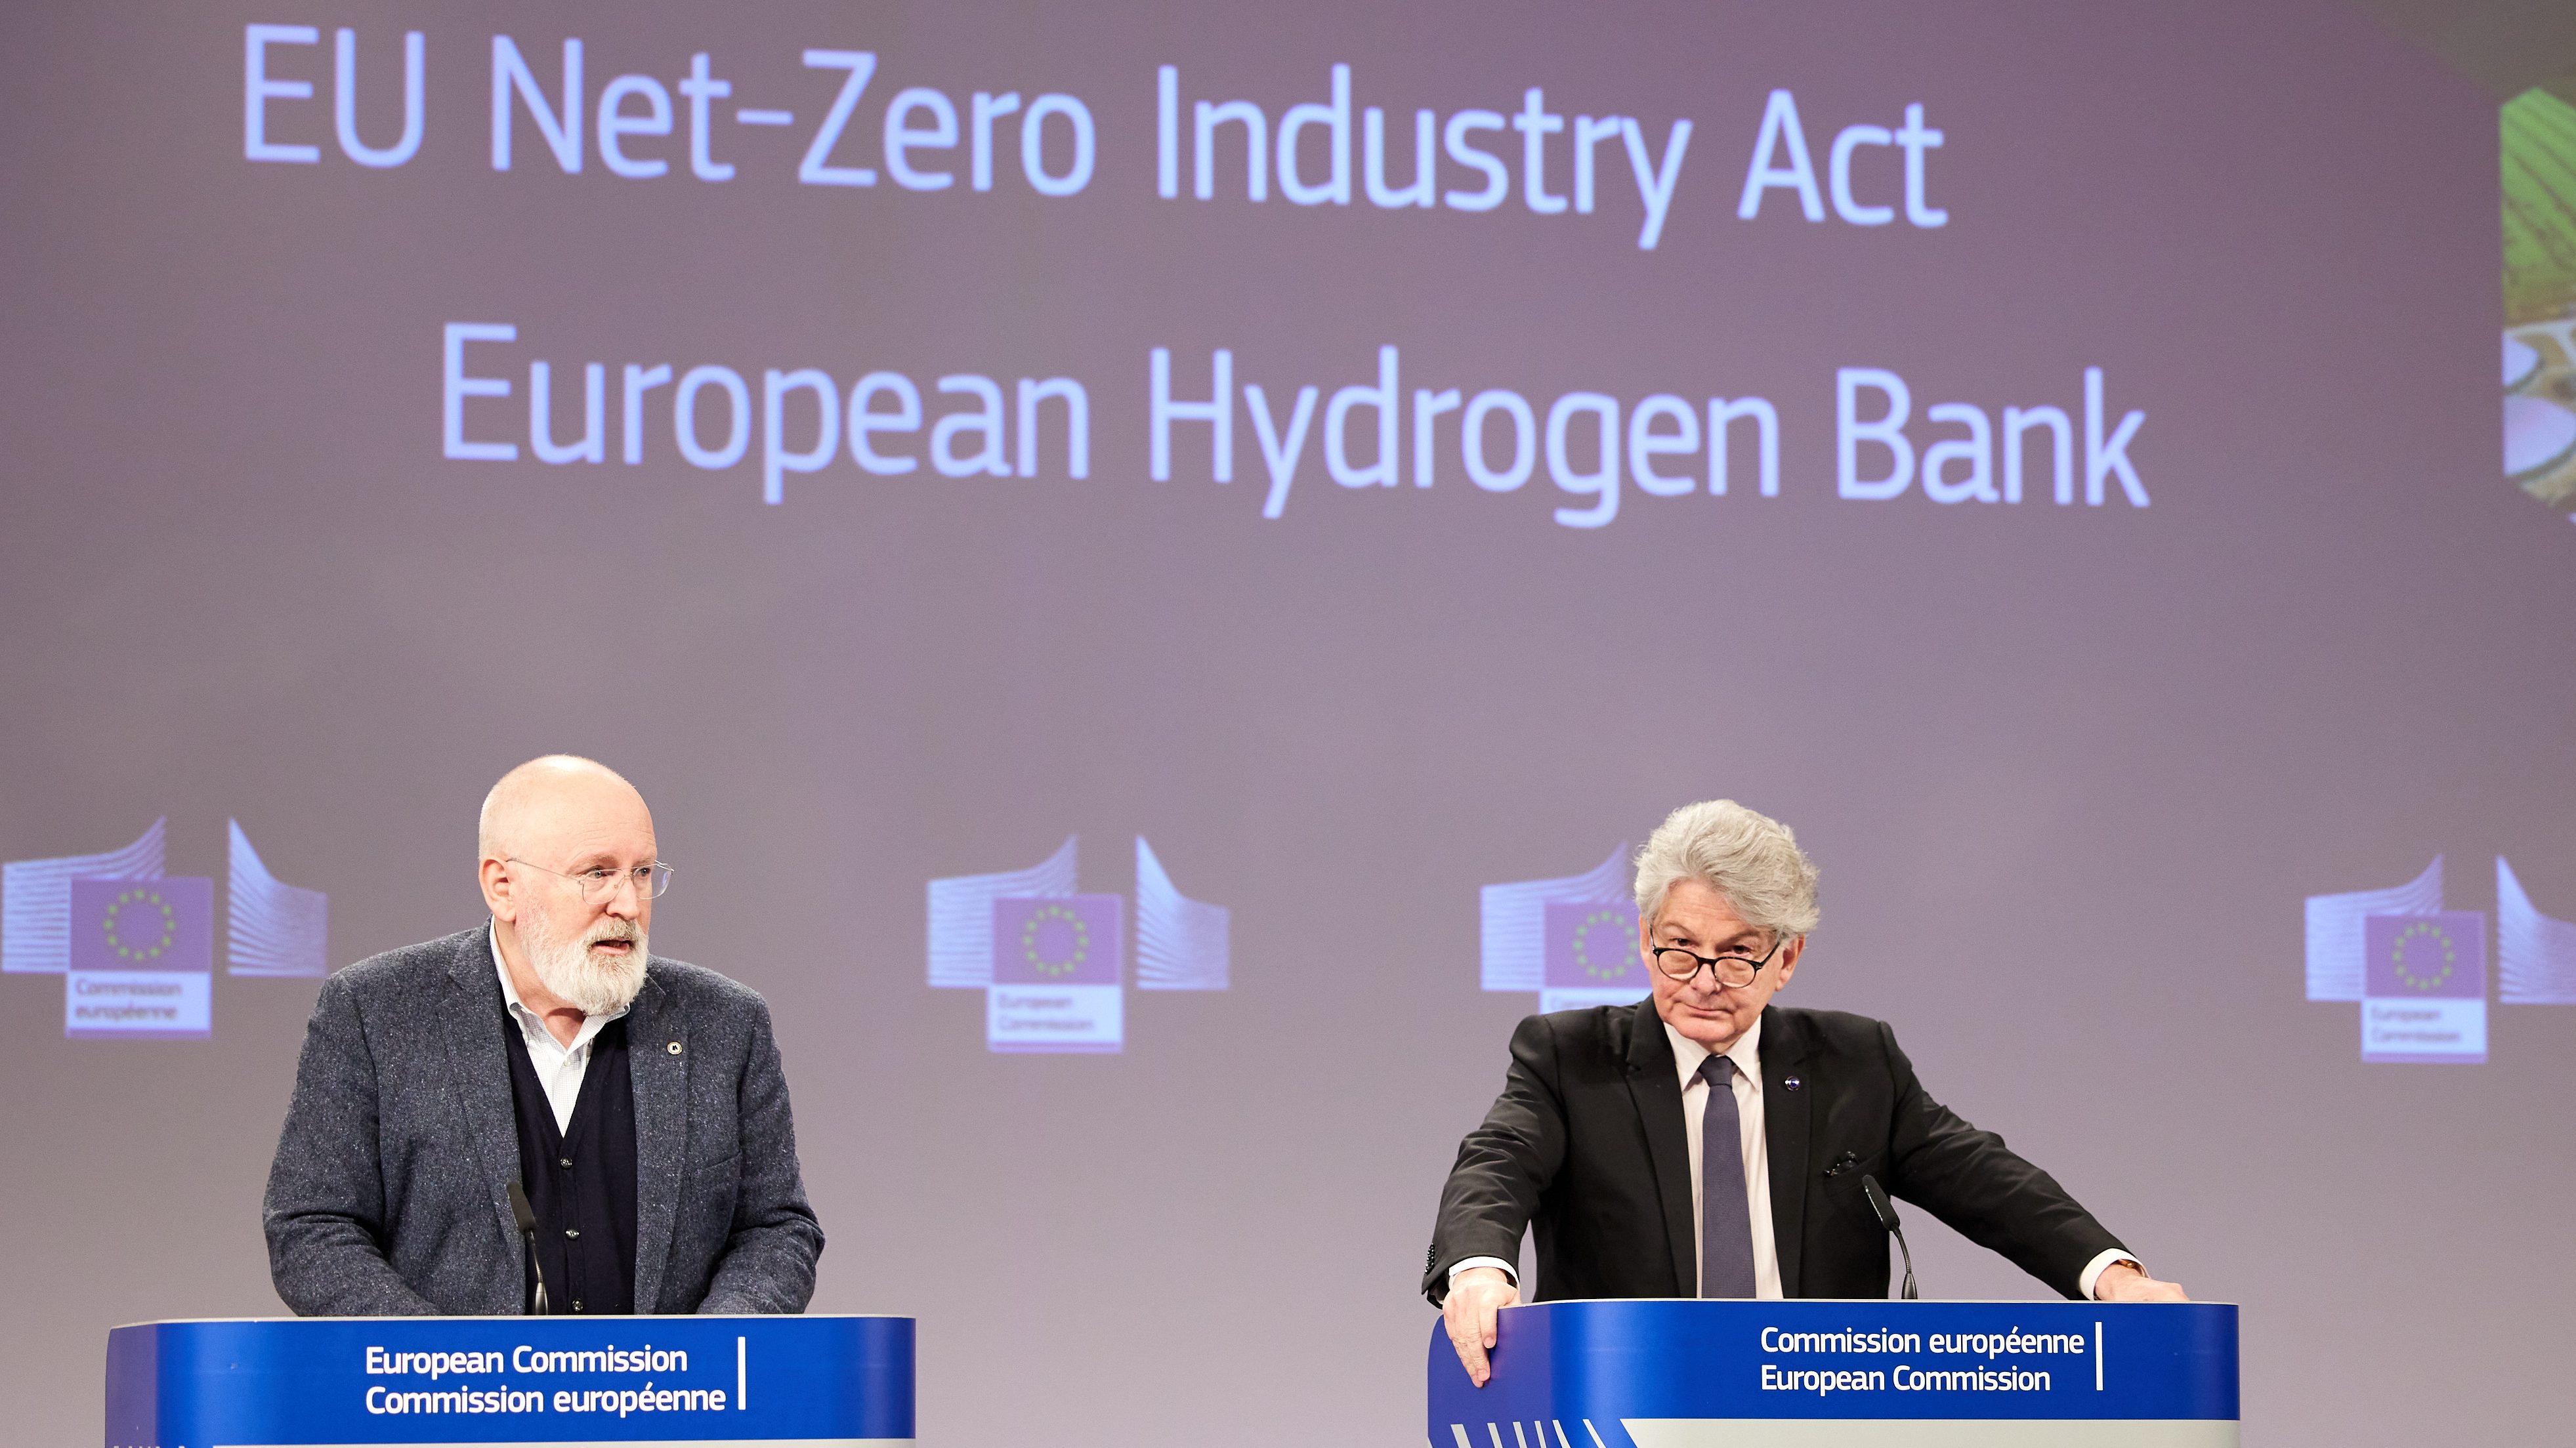 Comments on the Net Zero Industry Act unveiled by the European Commission